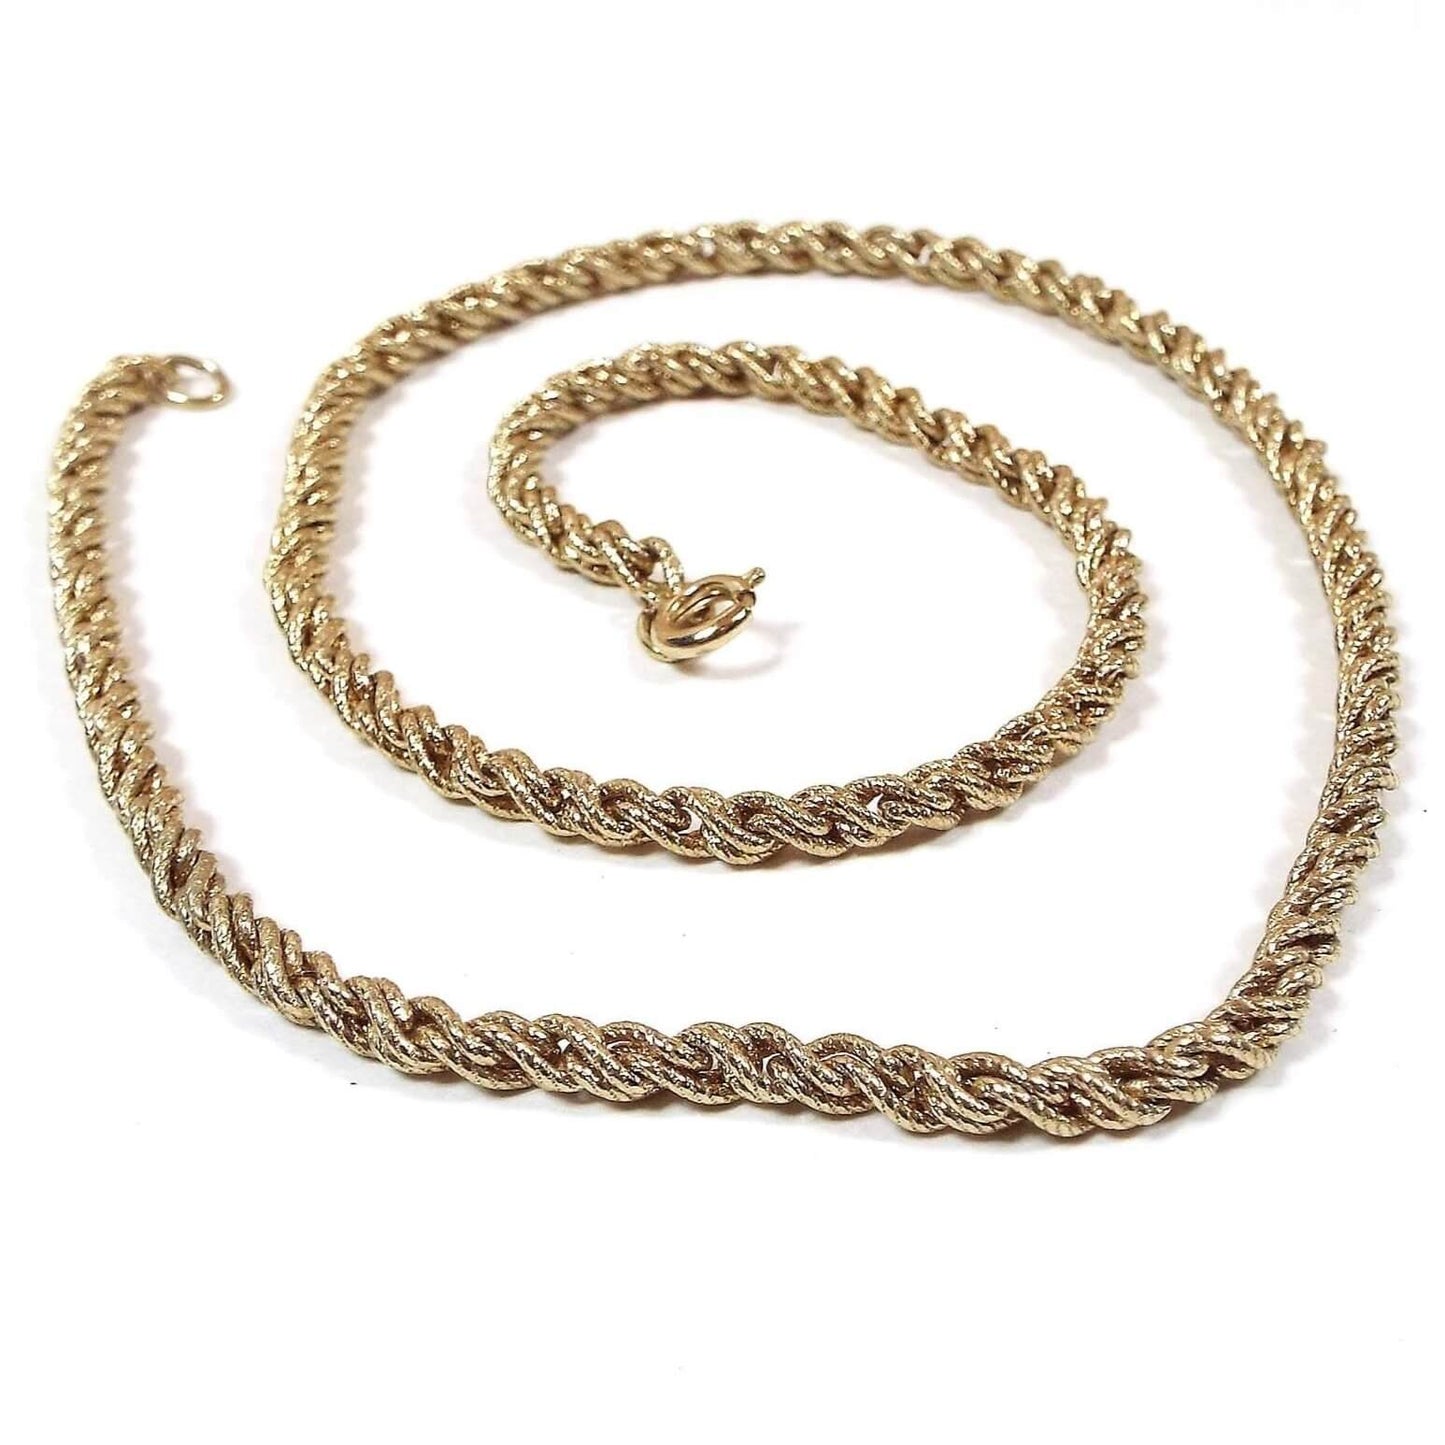 Top view of the retro vintage rope chain. The metal is gold tone in color. Necklace has a twisted rope chain design with a round spring ring clasp at the end.